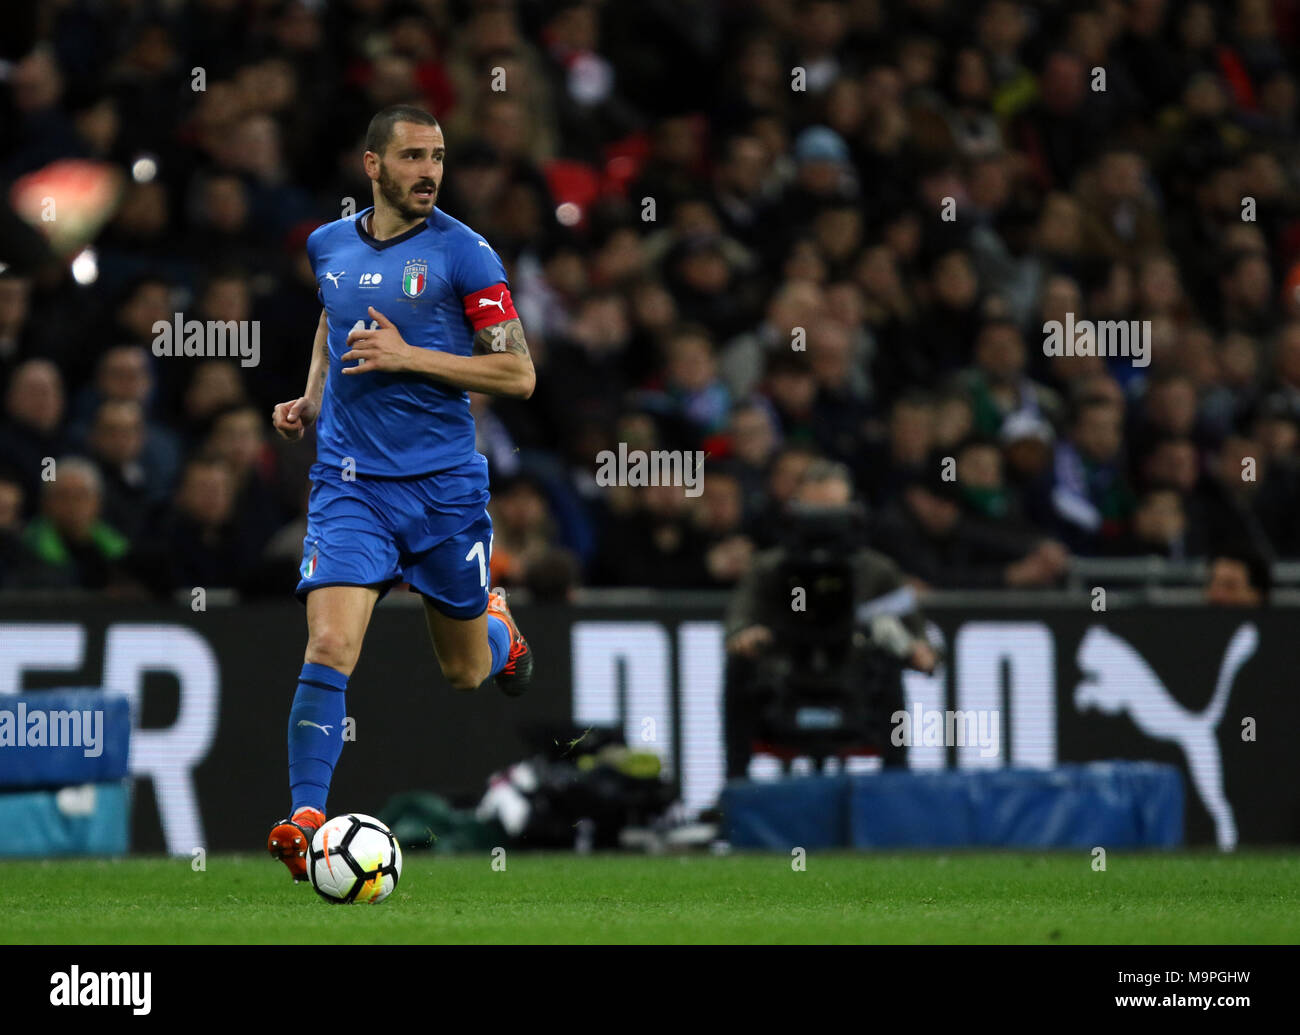 London, UK. 27th March, 2018. Leonardo Bonucci (I) at the England v Italy International Friendly football match, at Wembley Stadium, London, on March 27, 2018. **This picture is for editorial use only** Credit: Paul Marriott/Alamy Live News Stock Photo